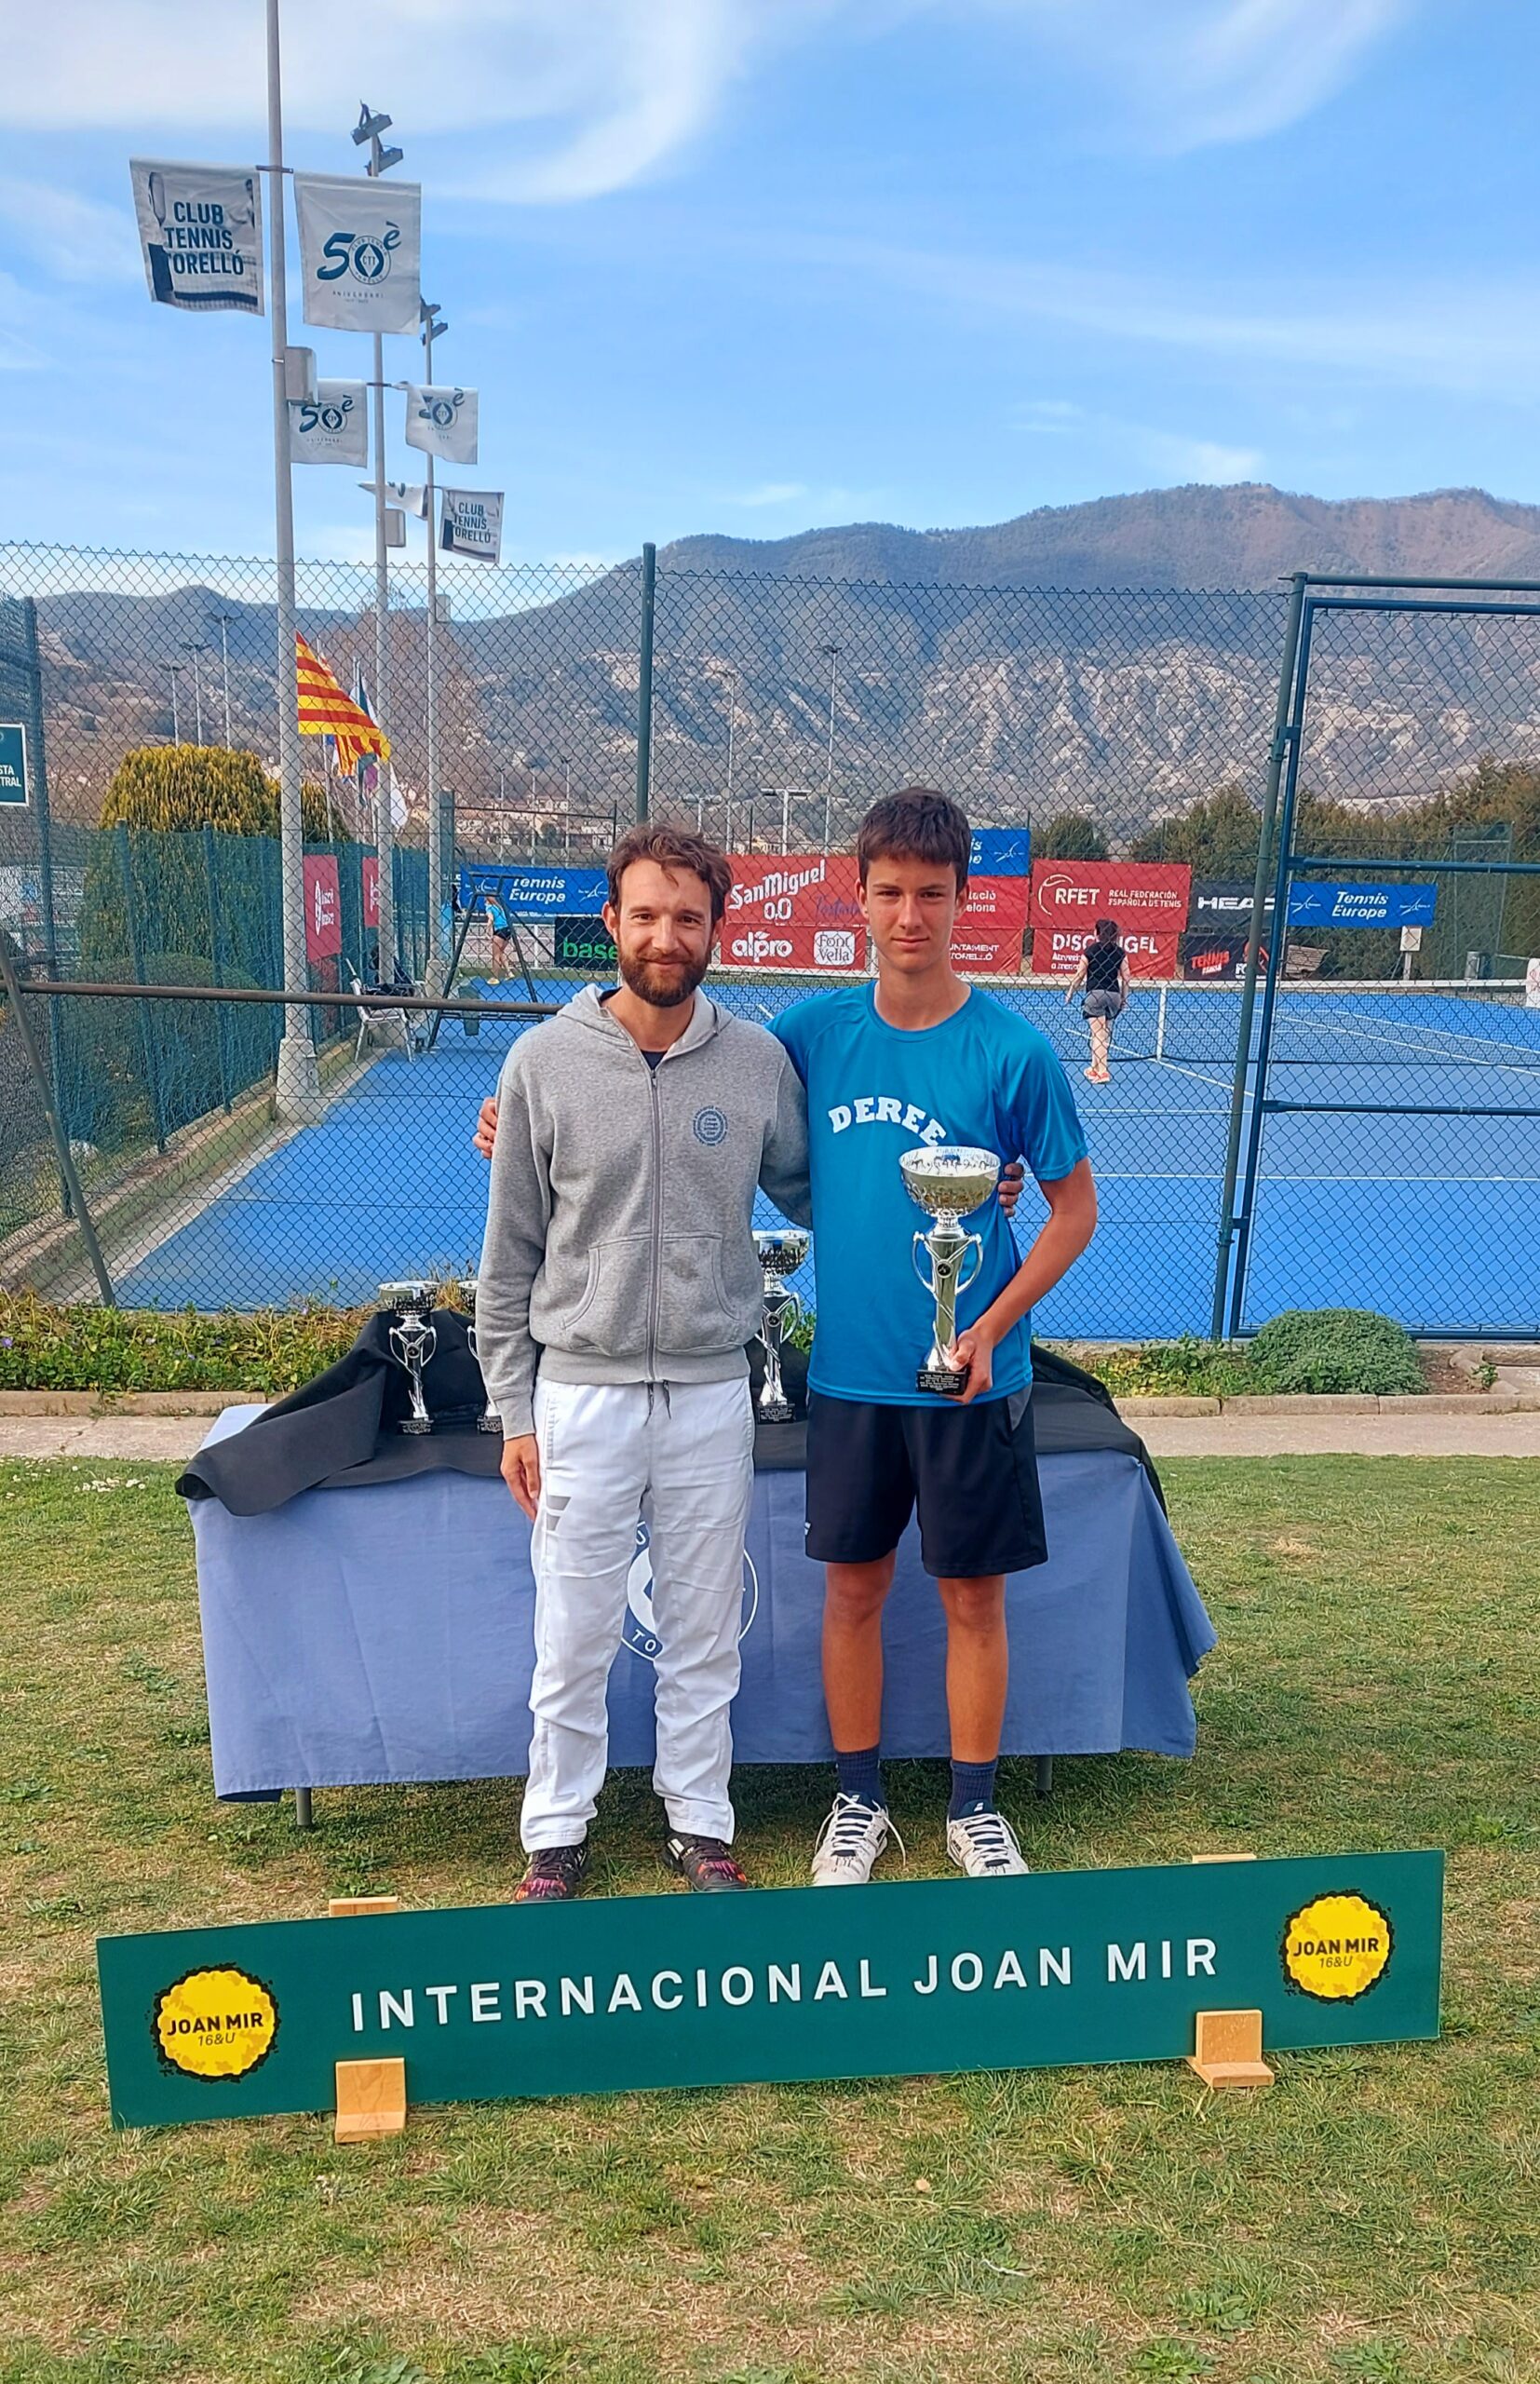 First place for the Deree Tennis Academy in U16 Tennis Europe Category-1 International Tournament!